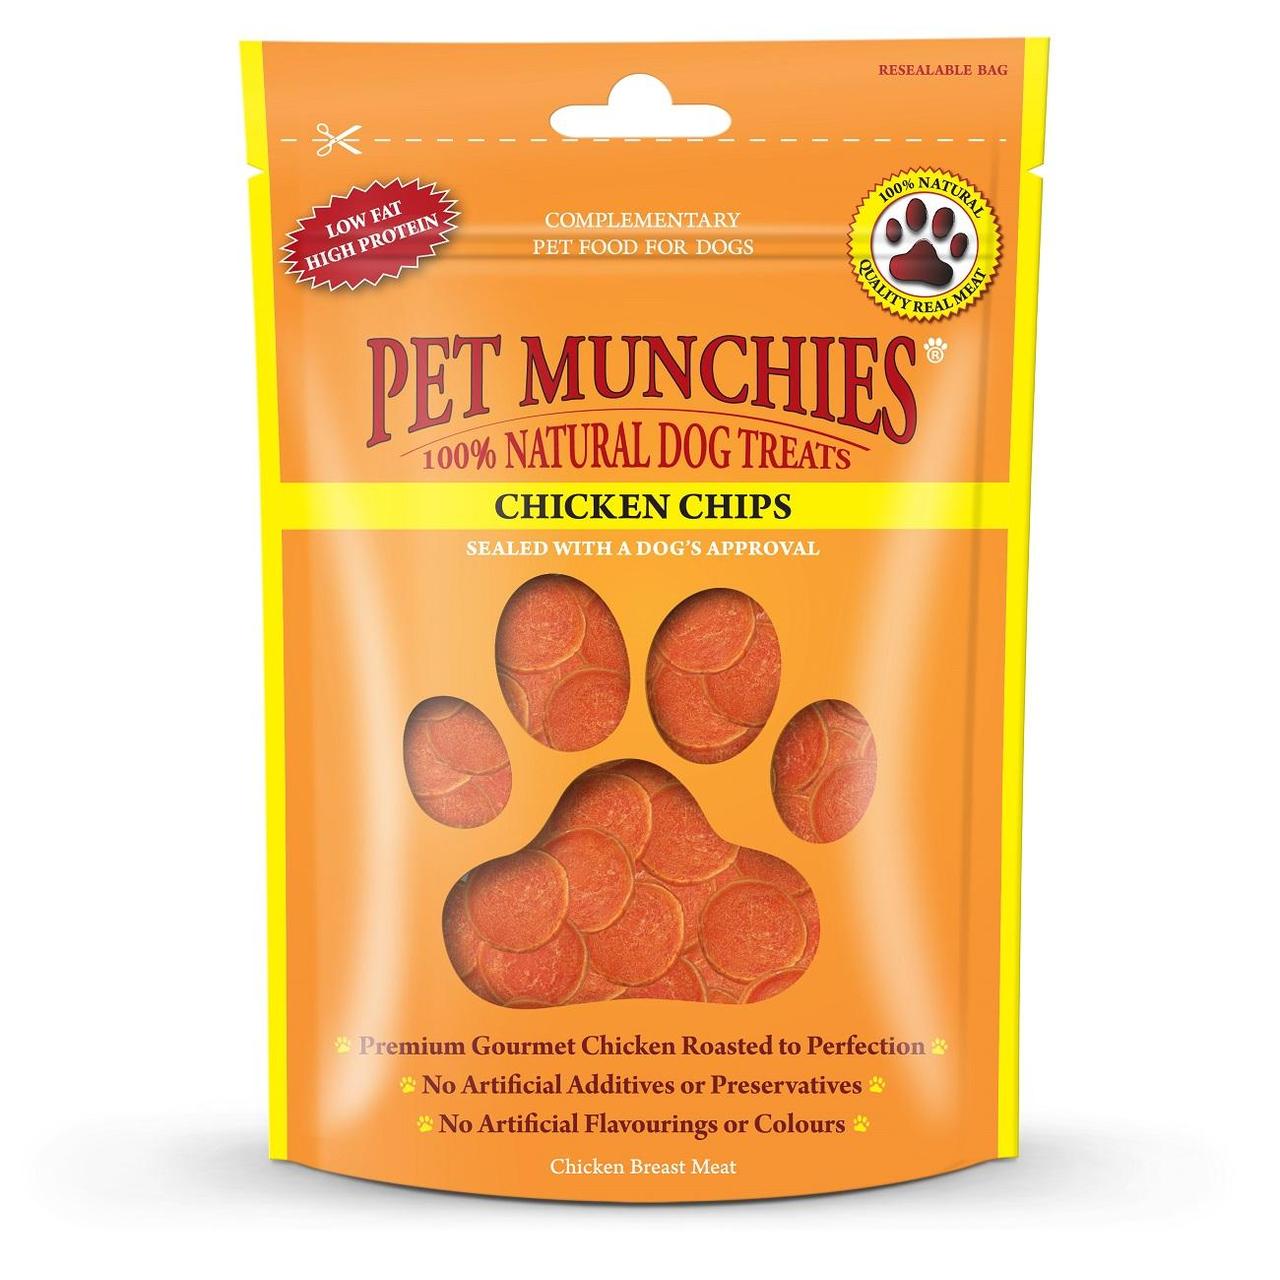 An image of Pet Munchies 100% Natural Chicken Chips Dog Treats